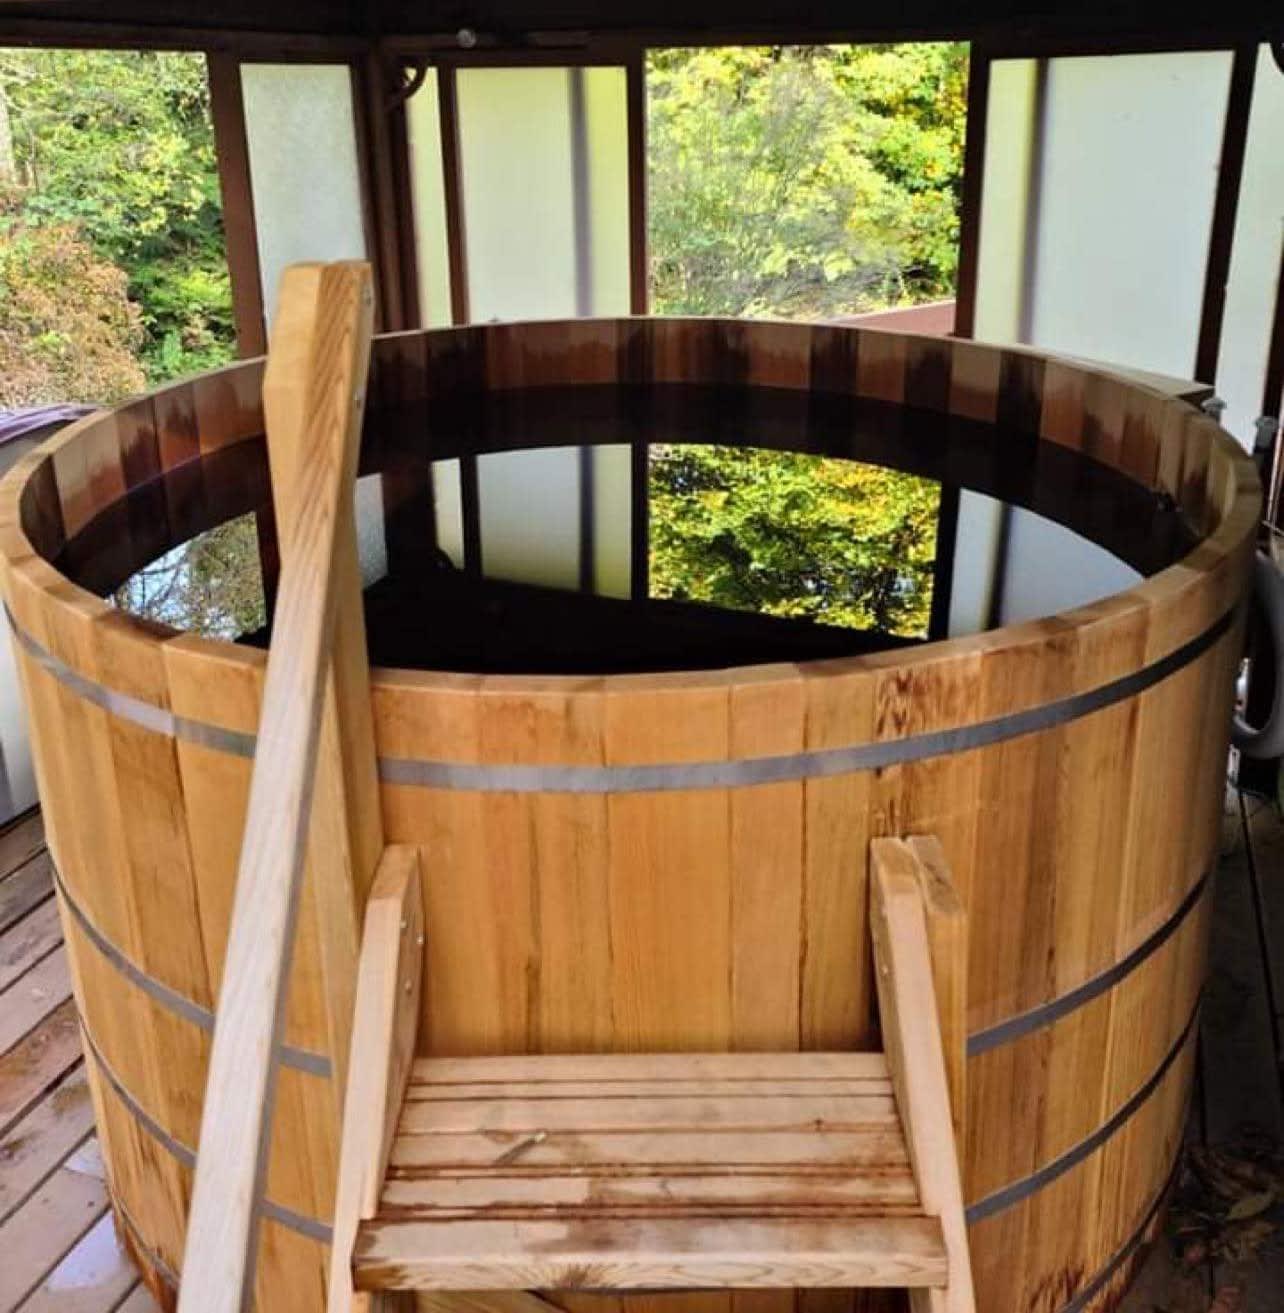 Cedar Hottub available 7am - 10pm M-F and 8am - 10pm over the weekends.